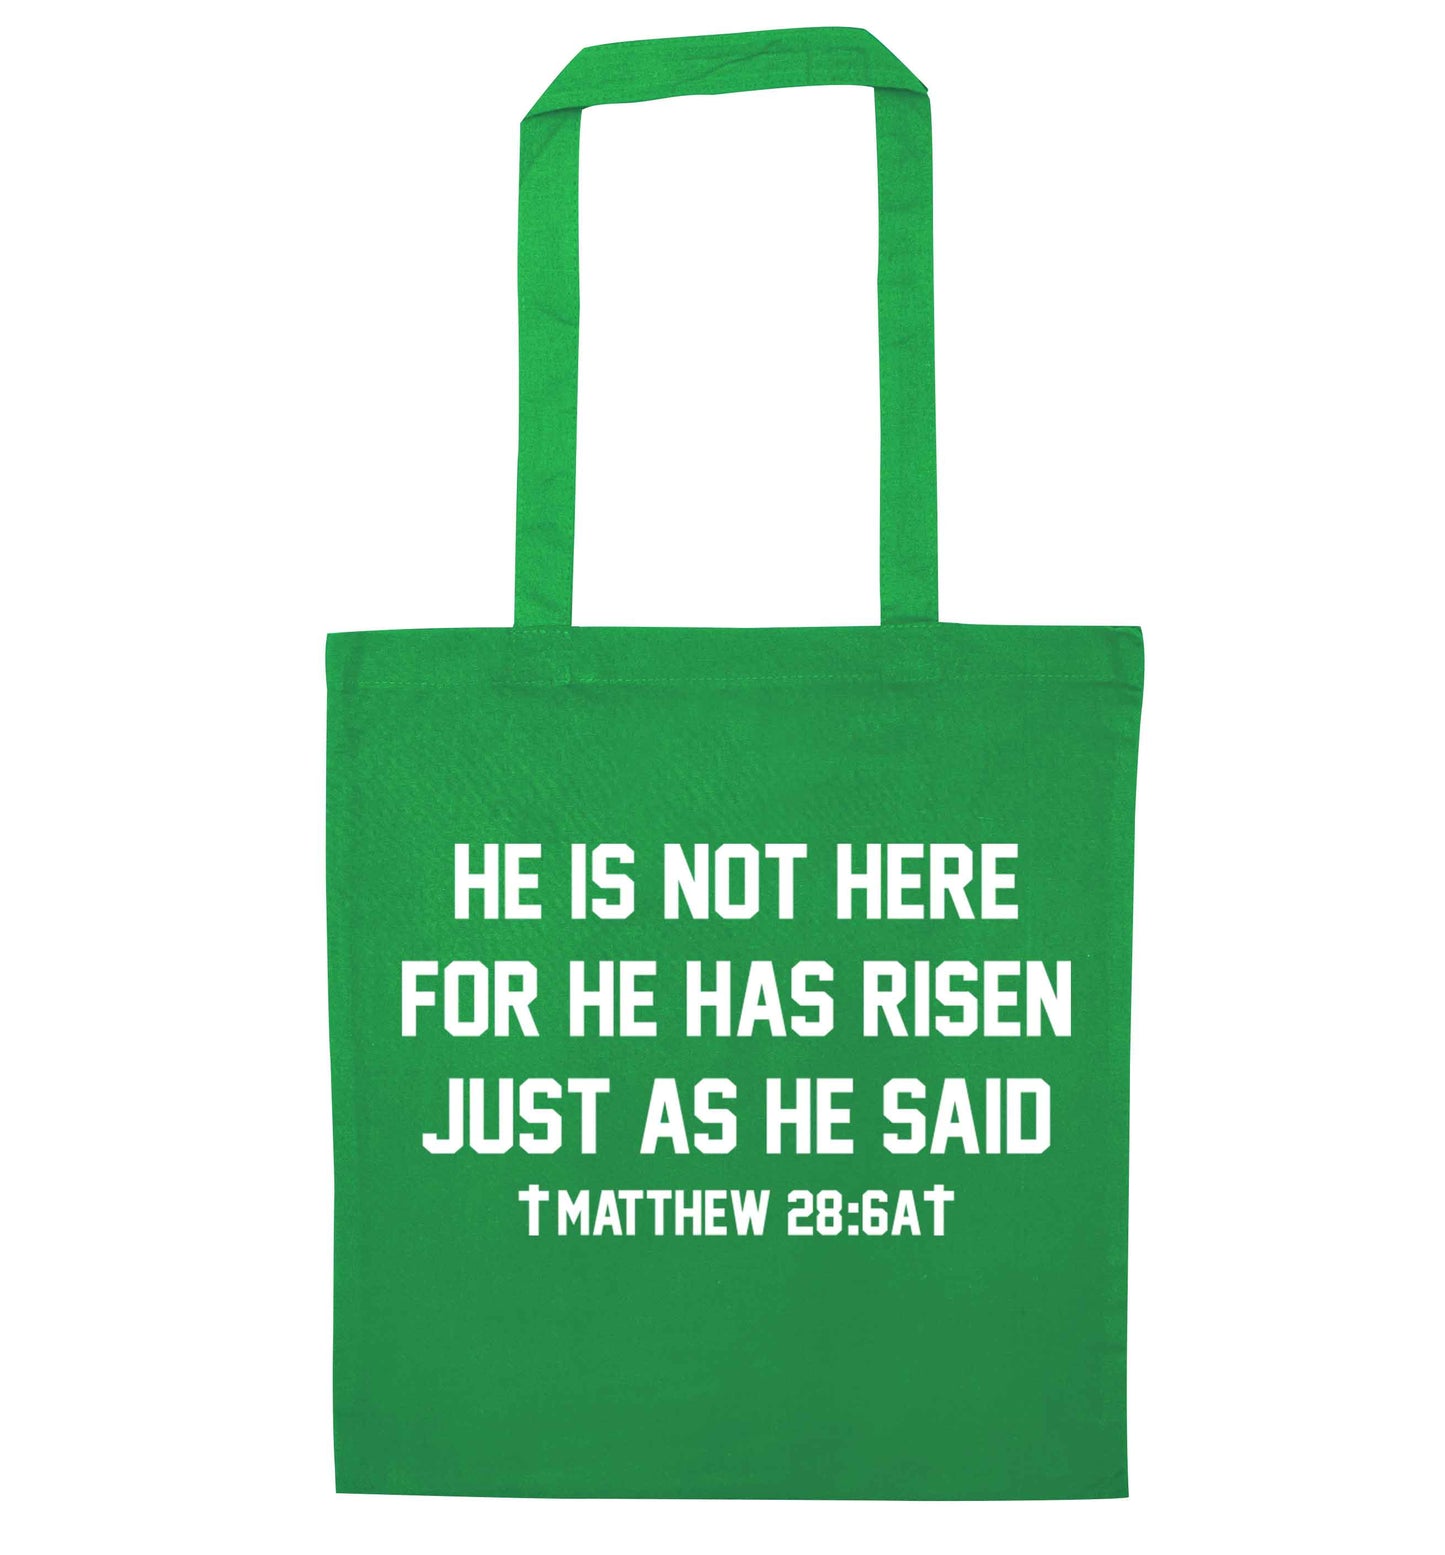 He is not here for he has risen just as he said matthew 28:6A green tote bag